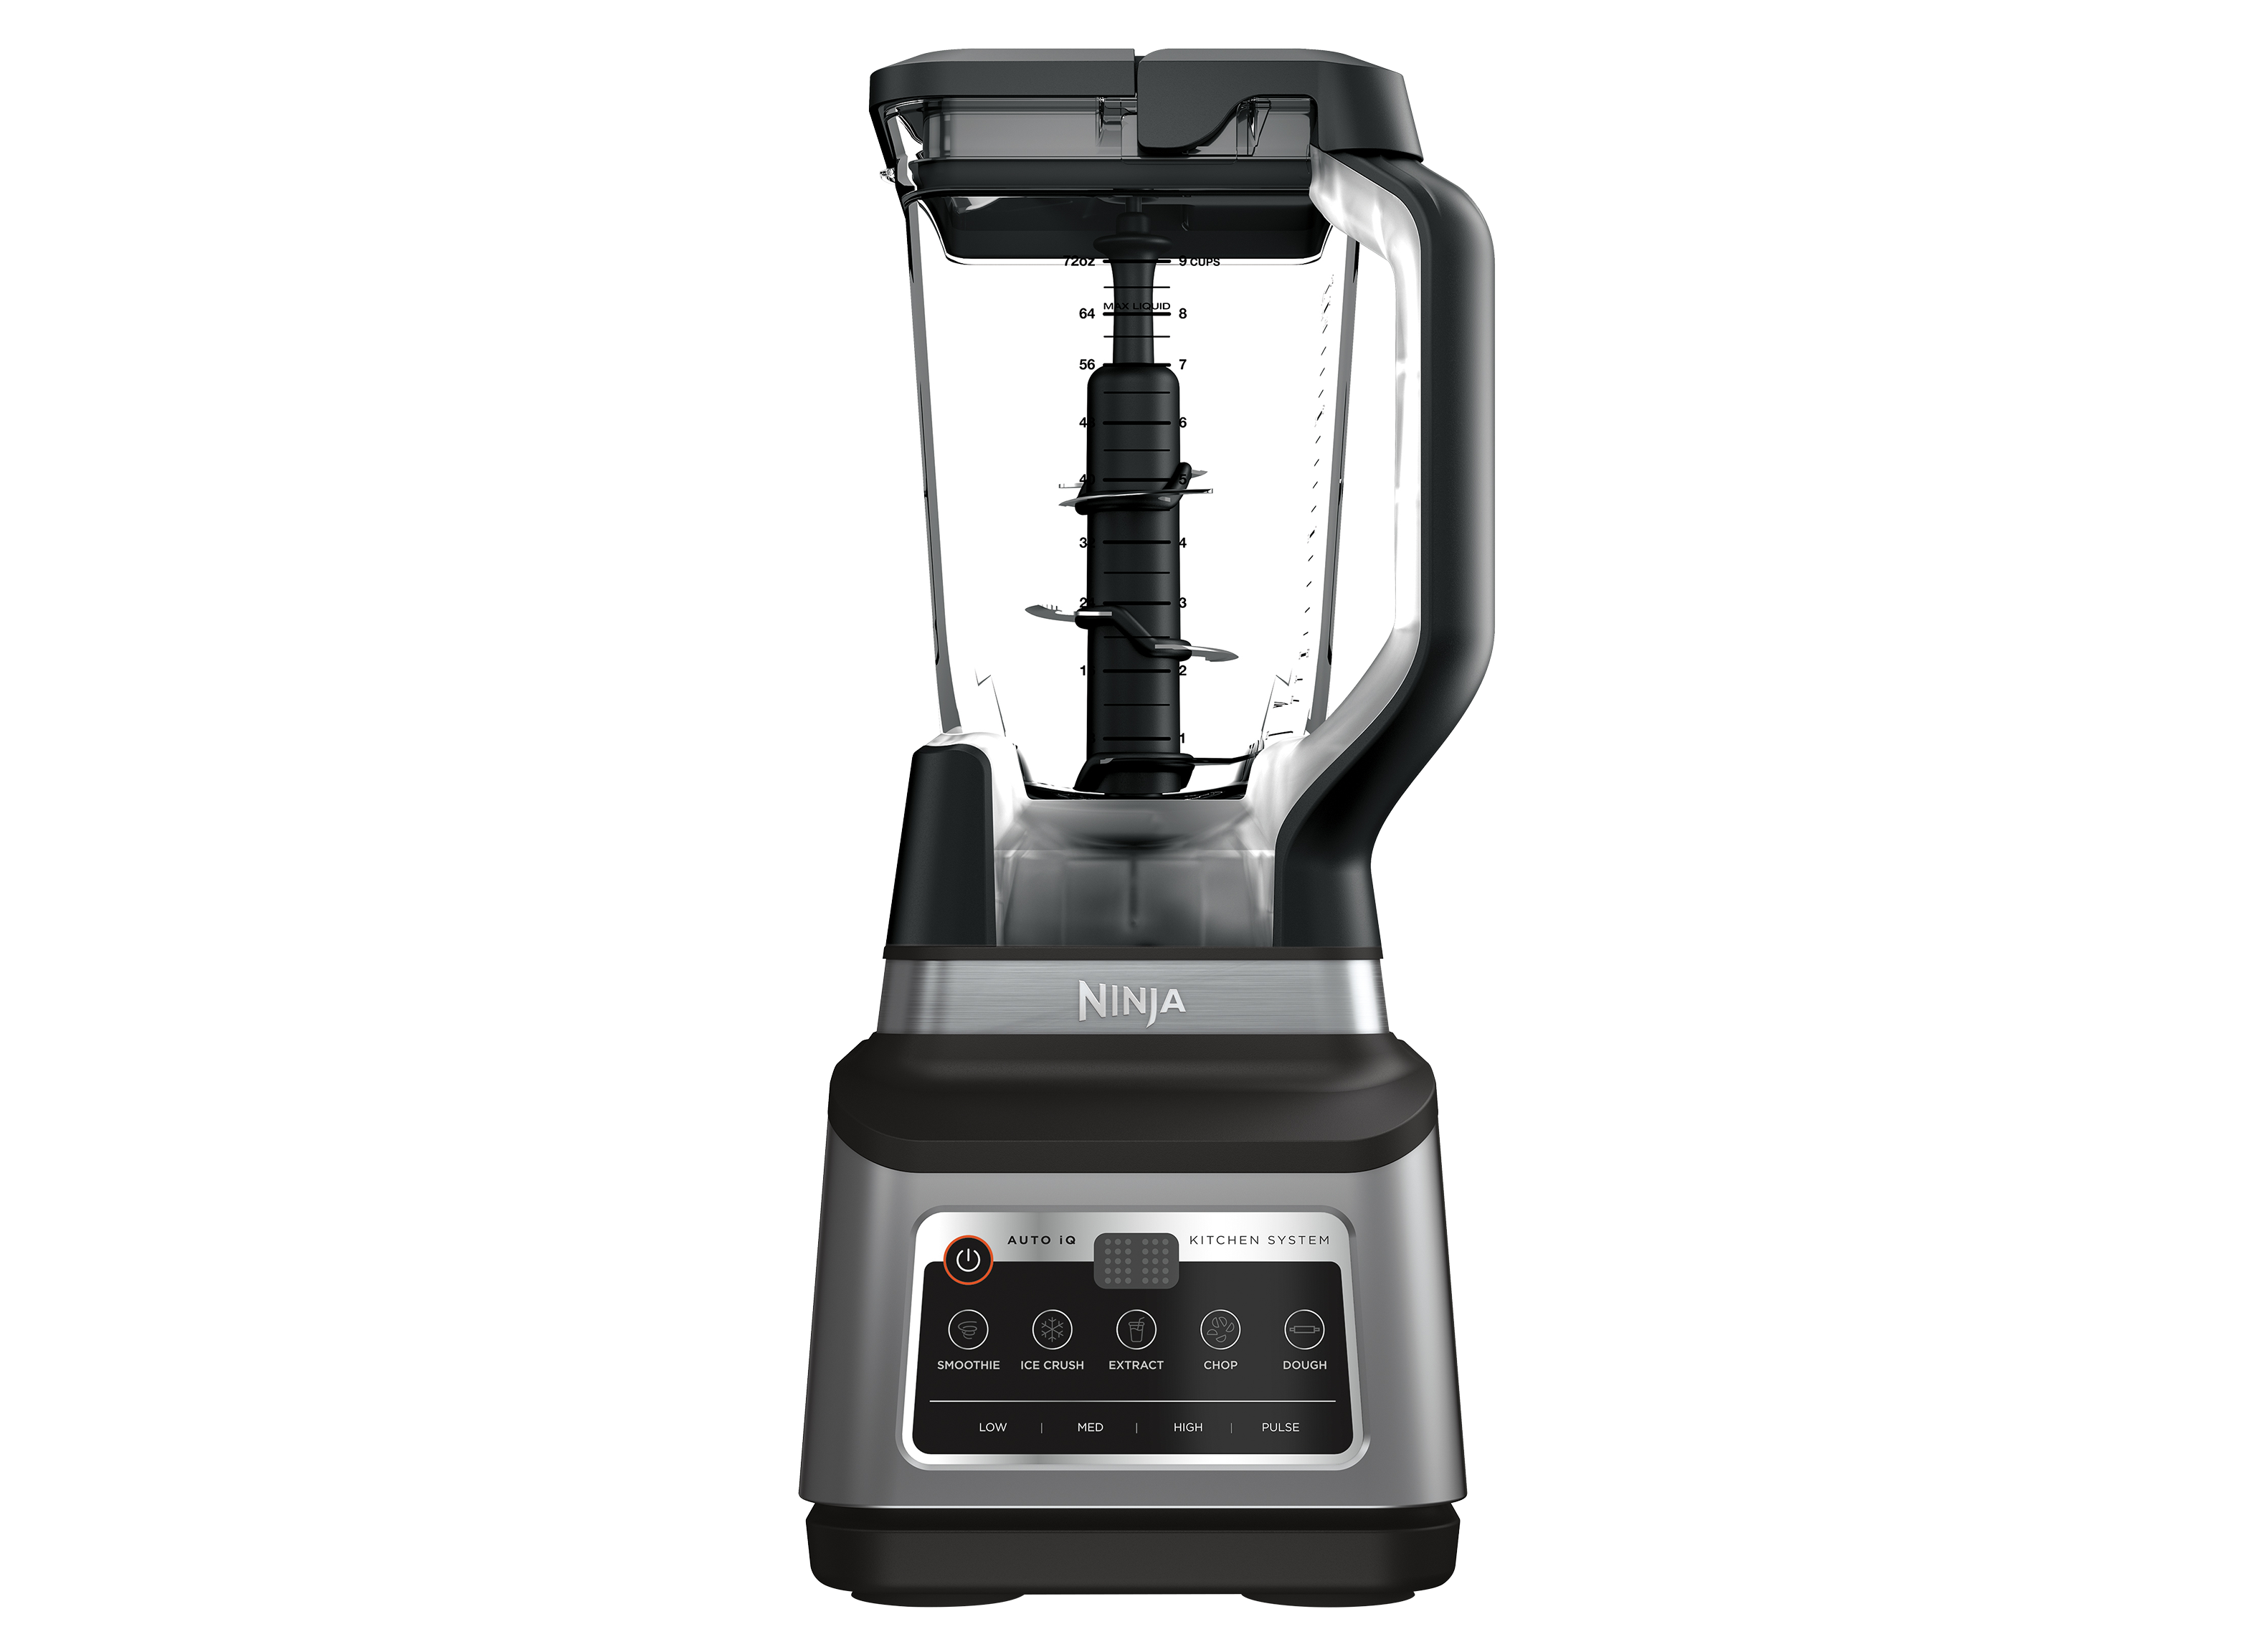 https://crdms.images.consumerreports.org/prod/products/cr/models/407261-full-sized-blenders-ninja-professional-plus-kitchen-system-bn801-10030845.png